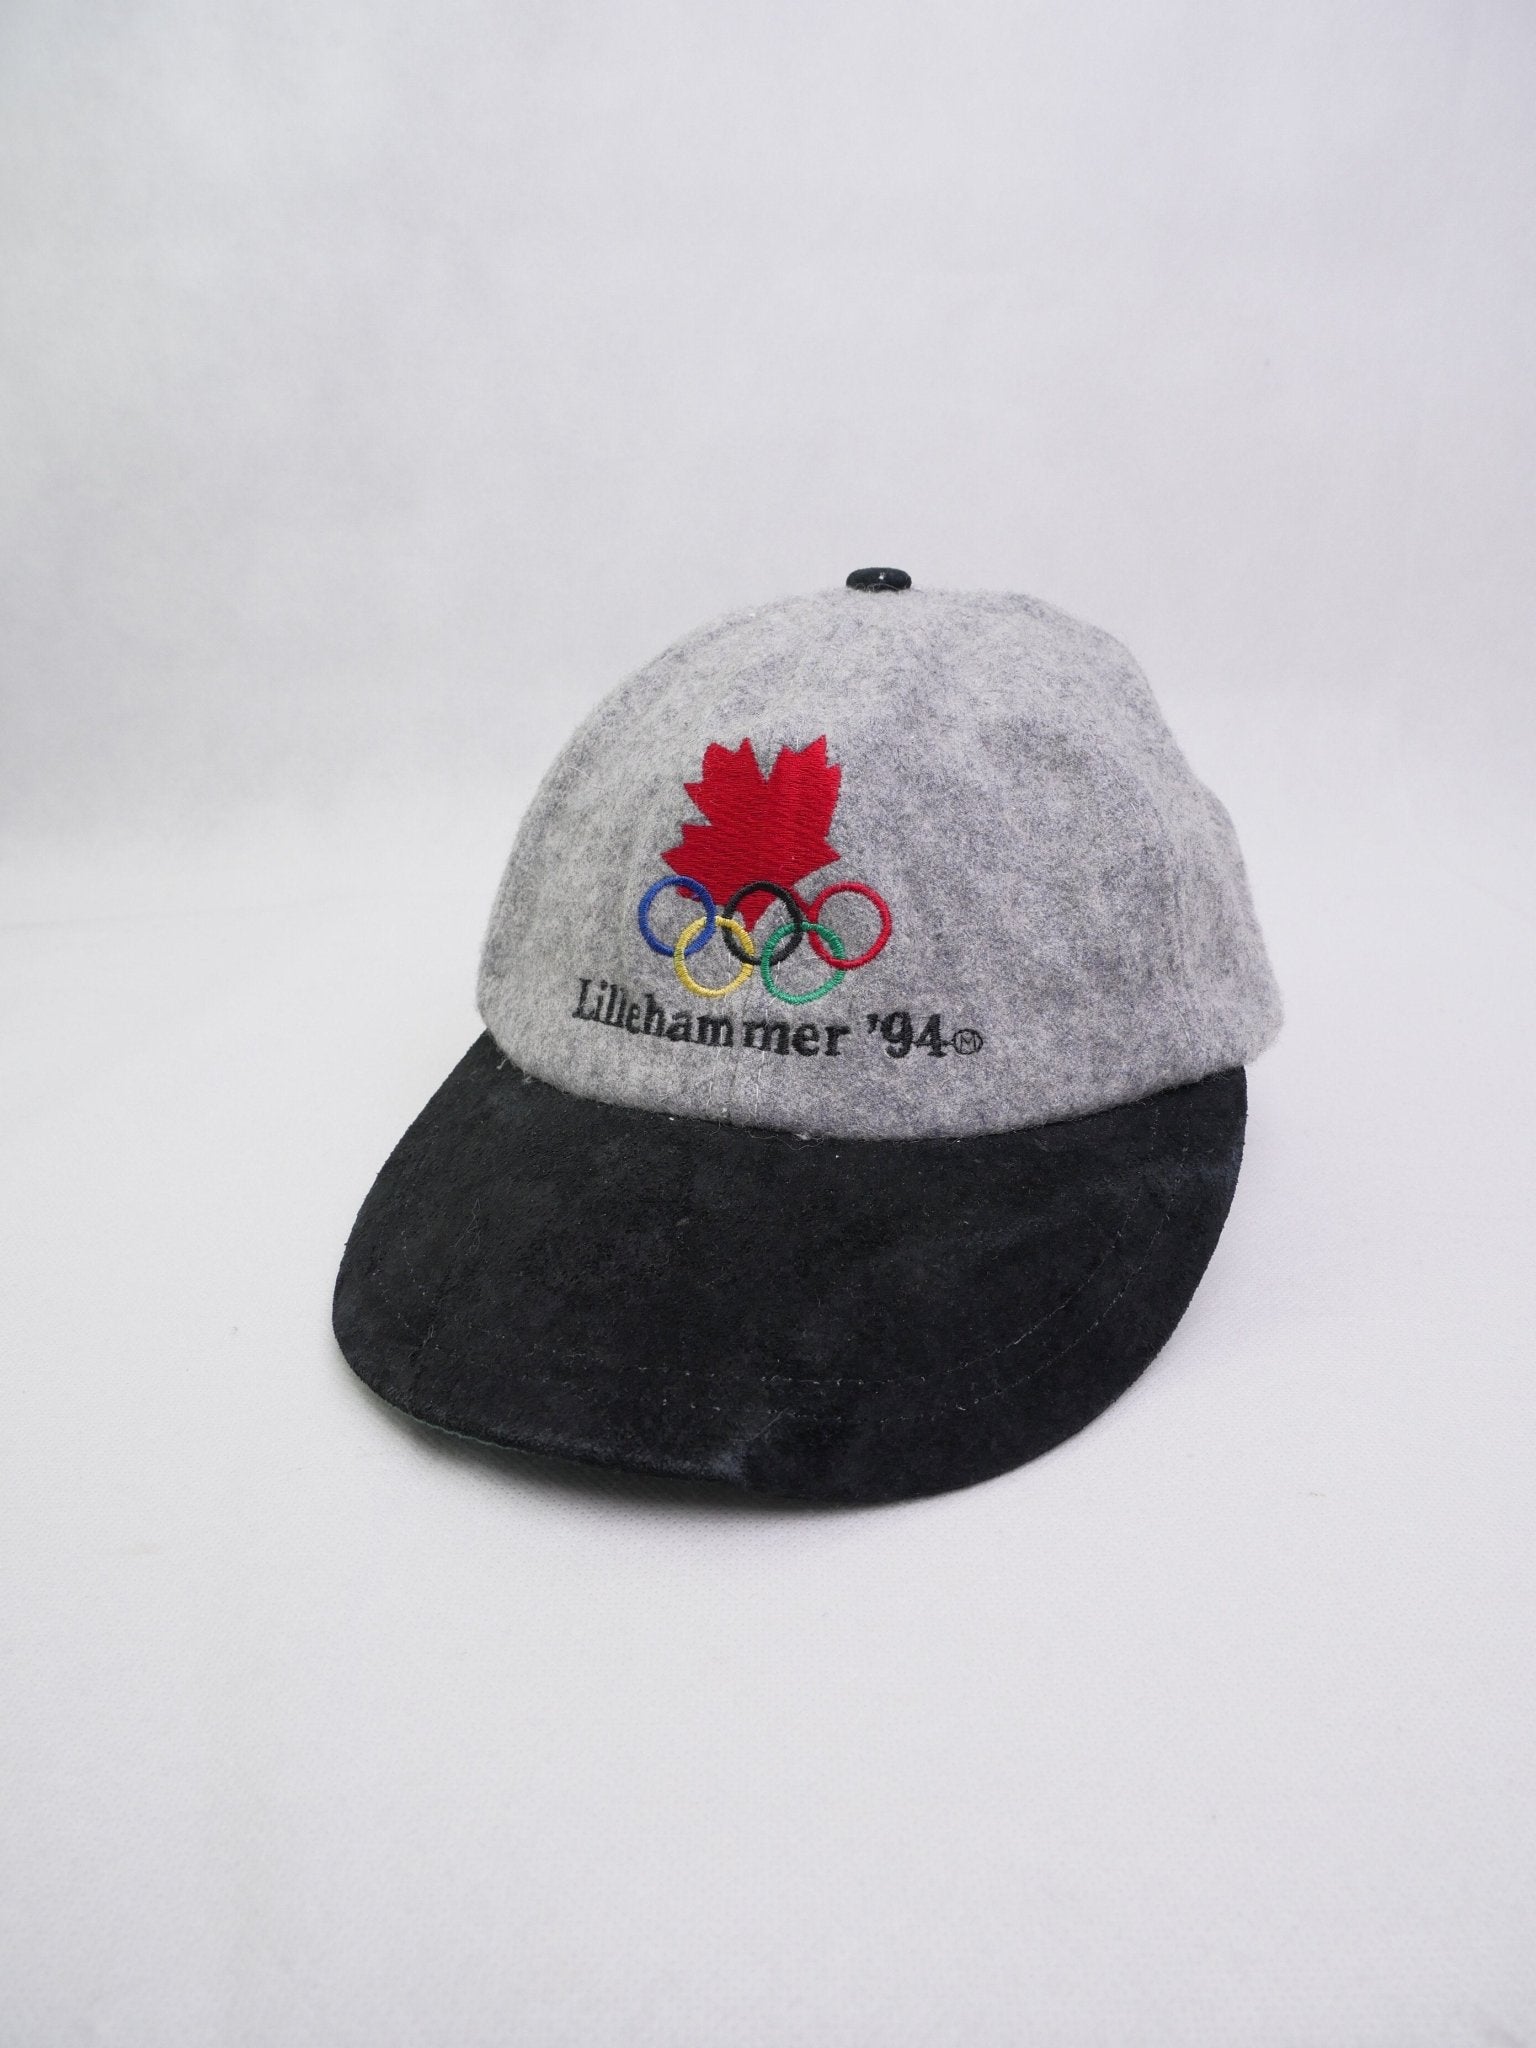 Lillehammer Olympics '94 embroidered Logo Cap Accessoire - Peeces